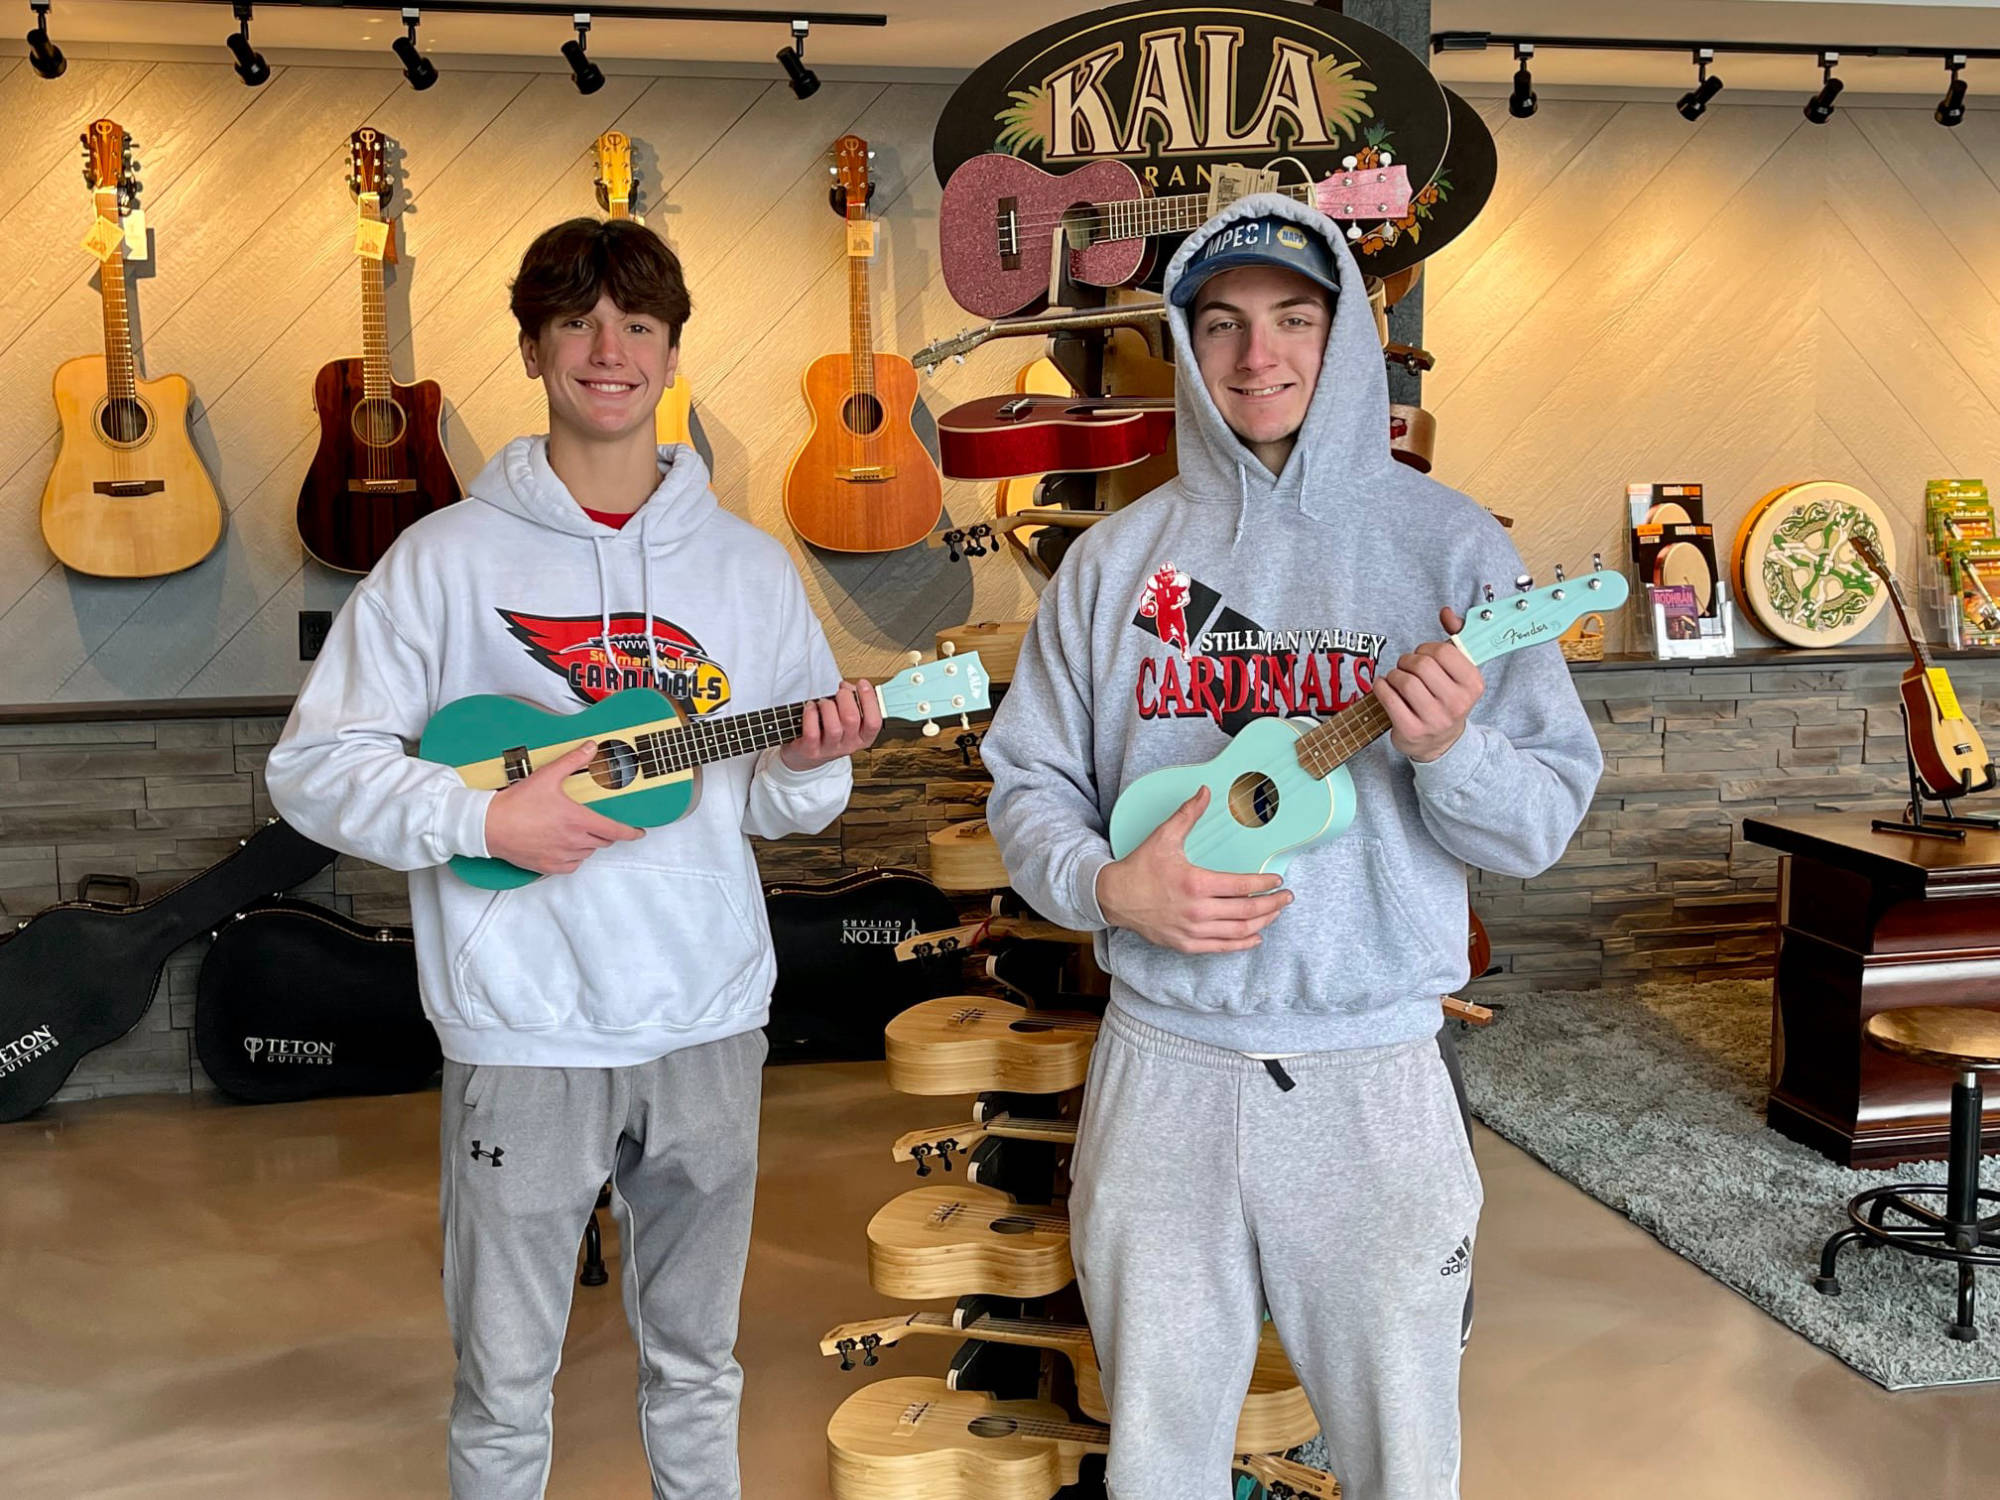 Madix and Colten each took home a Ukulele